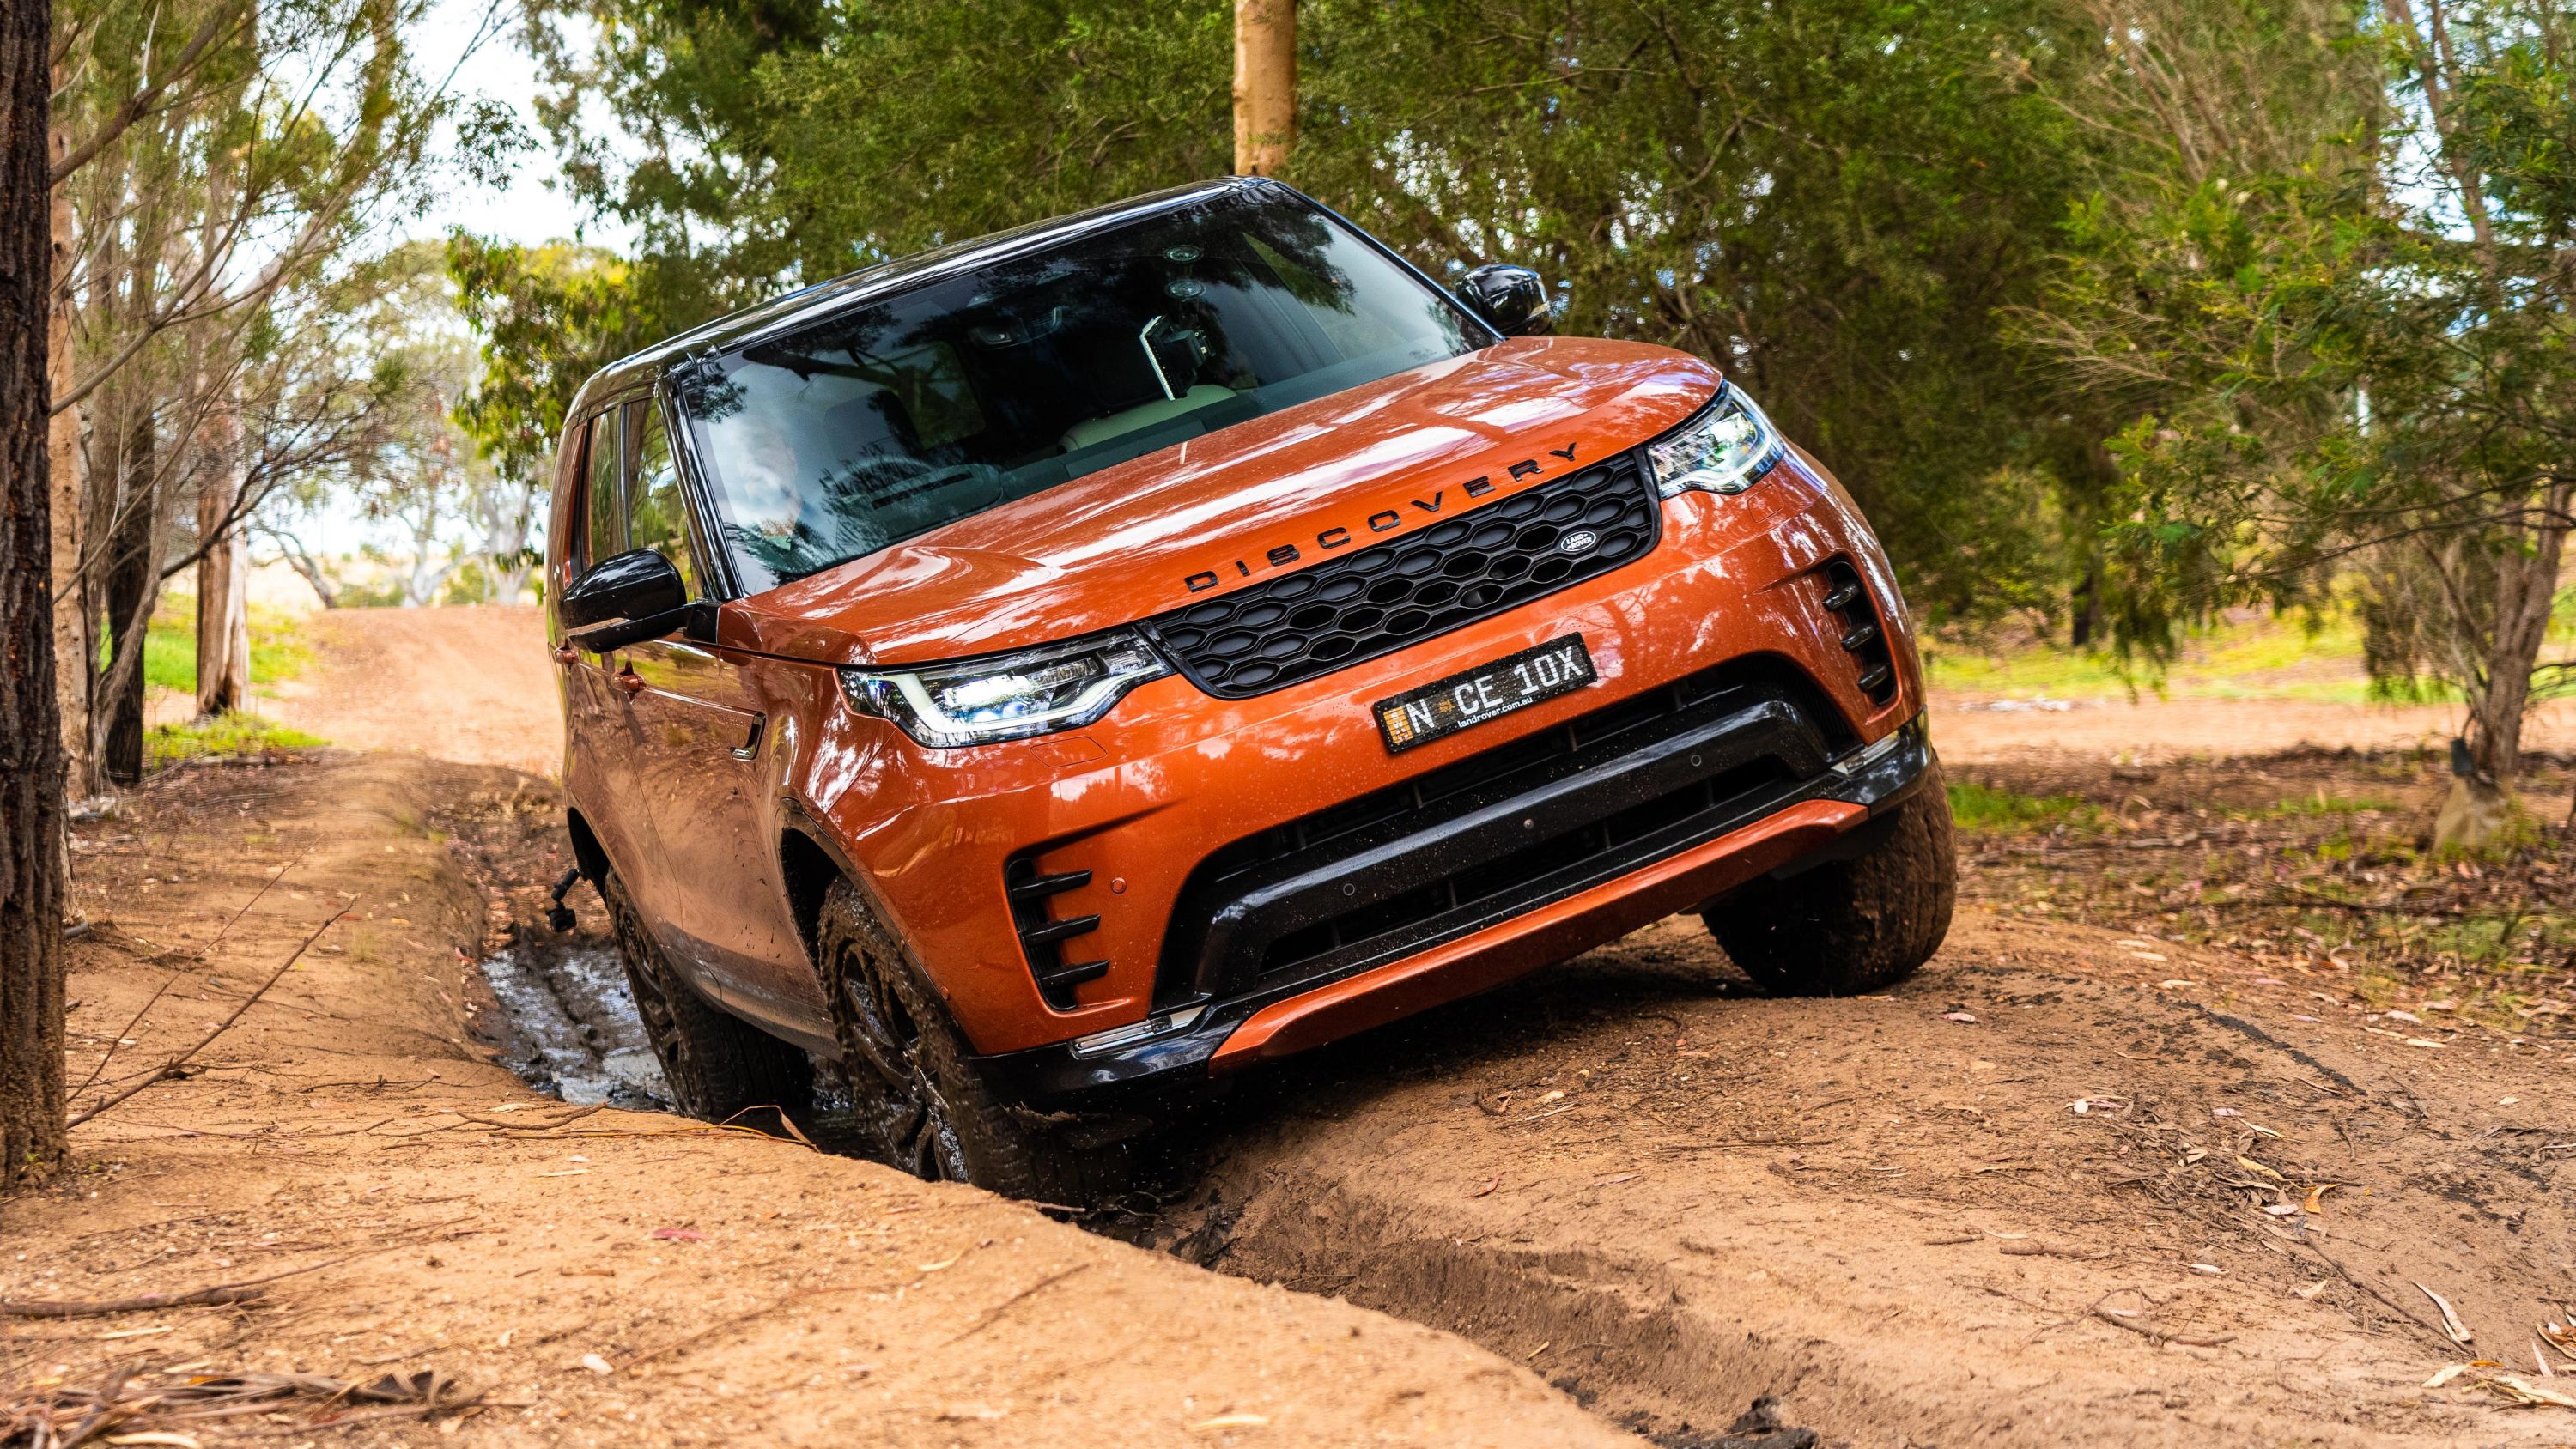 Land Rover Discovery Sport future in doubt, but new Discovery